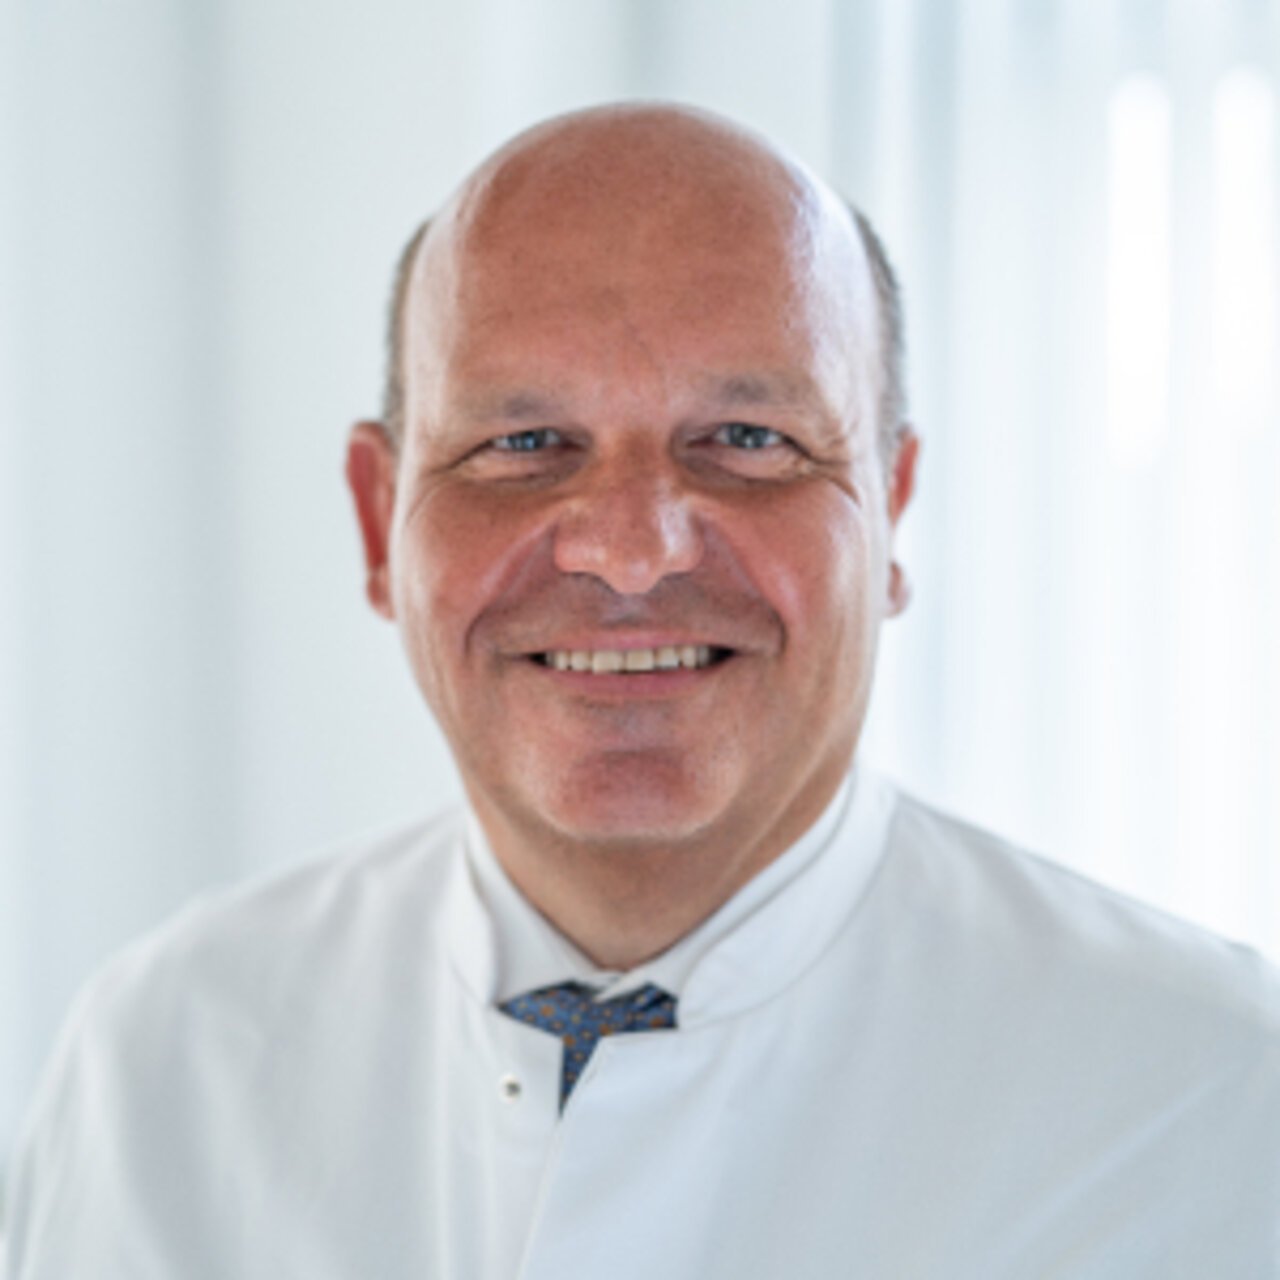 Prof. Dr Frank A. Wenger -  Specialist in Bariatric Surgery - Portrait